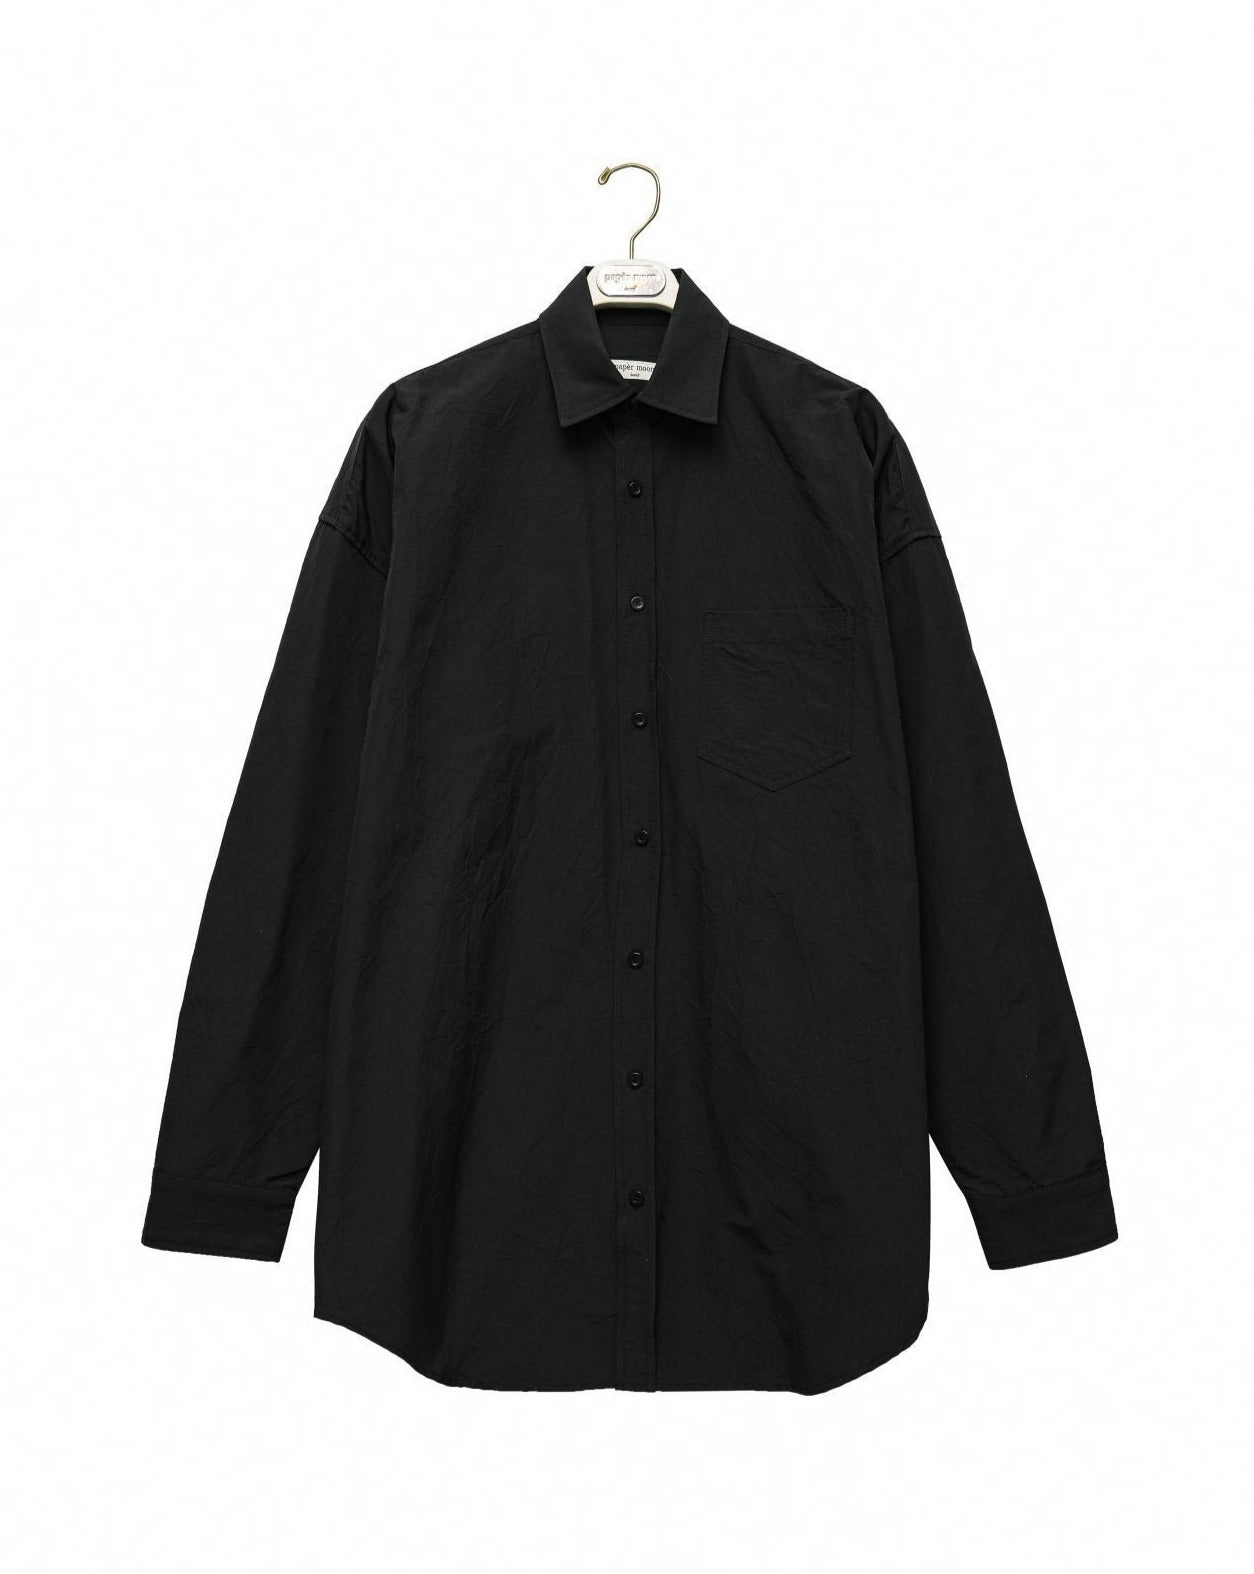 【PAPERMOON ペーパームーン】SS / Wrinkle Cotton Fabric Oversized Button Down Shirt